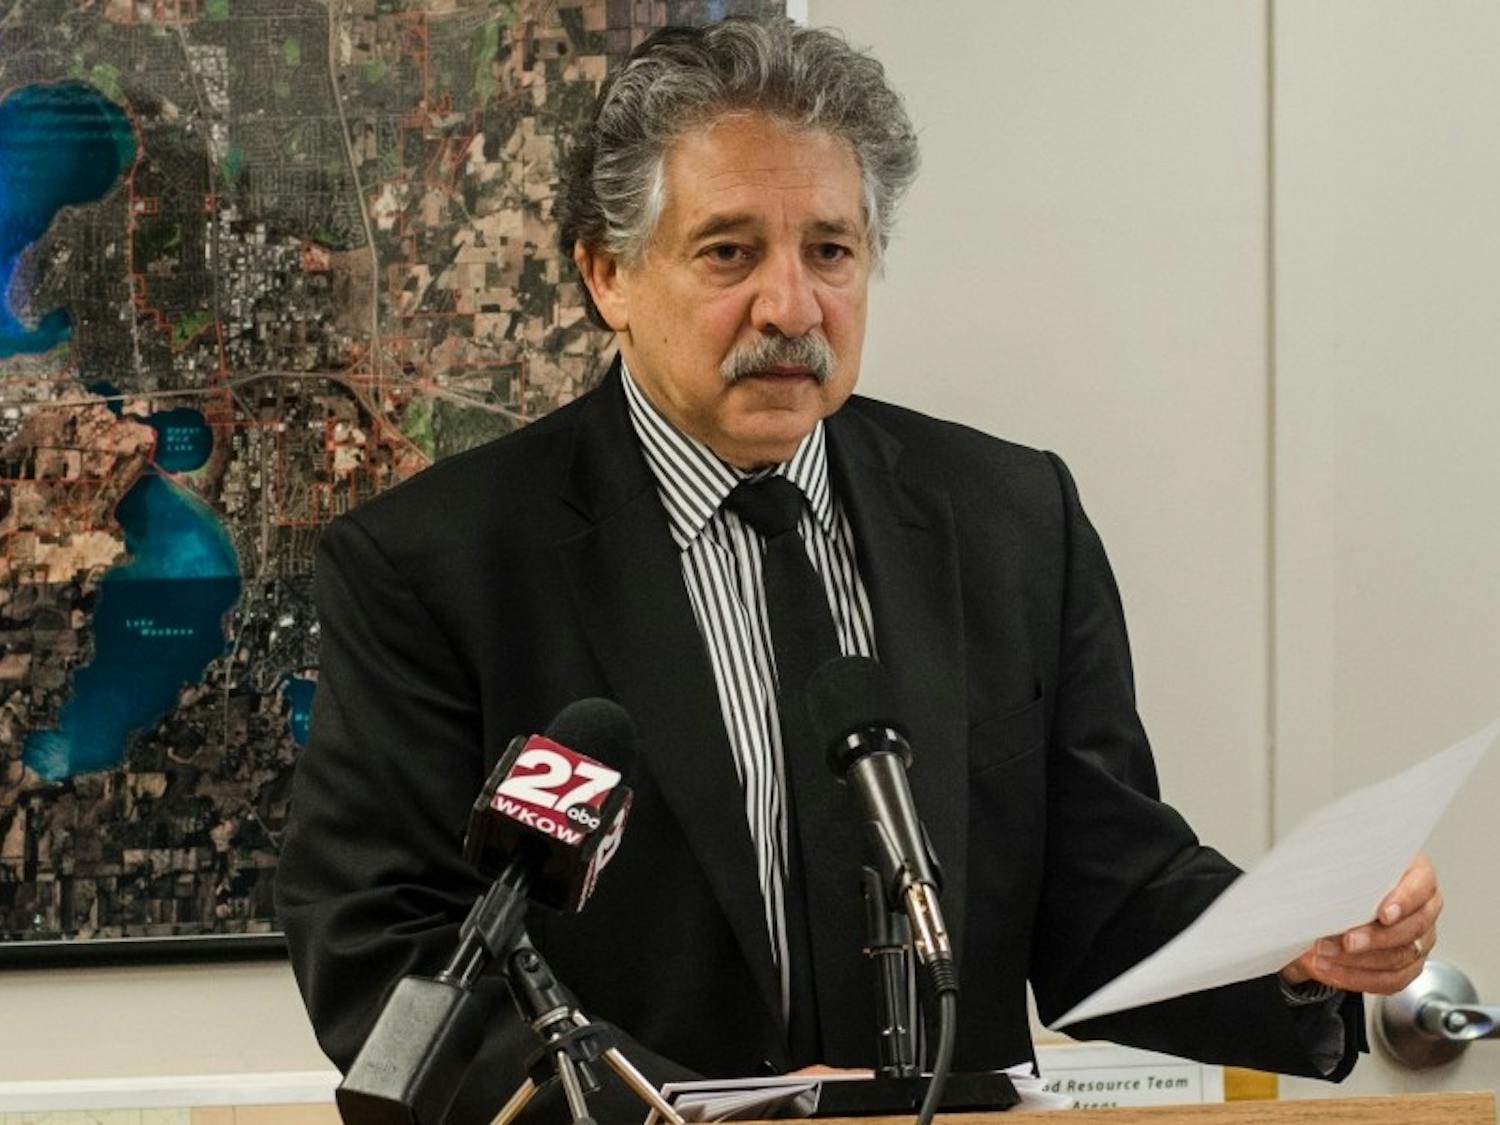 Madison Mayor Paul Soglin announced his re-election campaign in a video Friday, despite saying in July that he would not run.